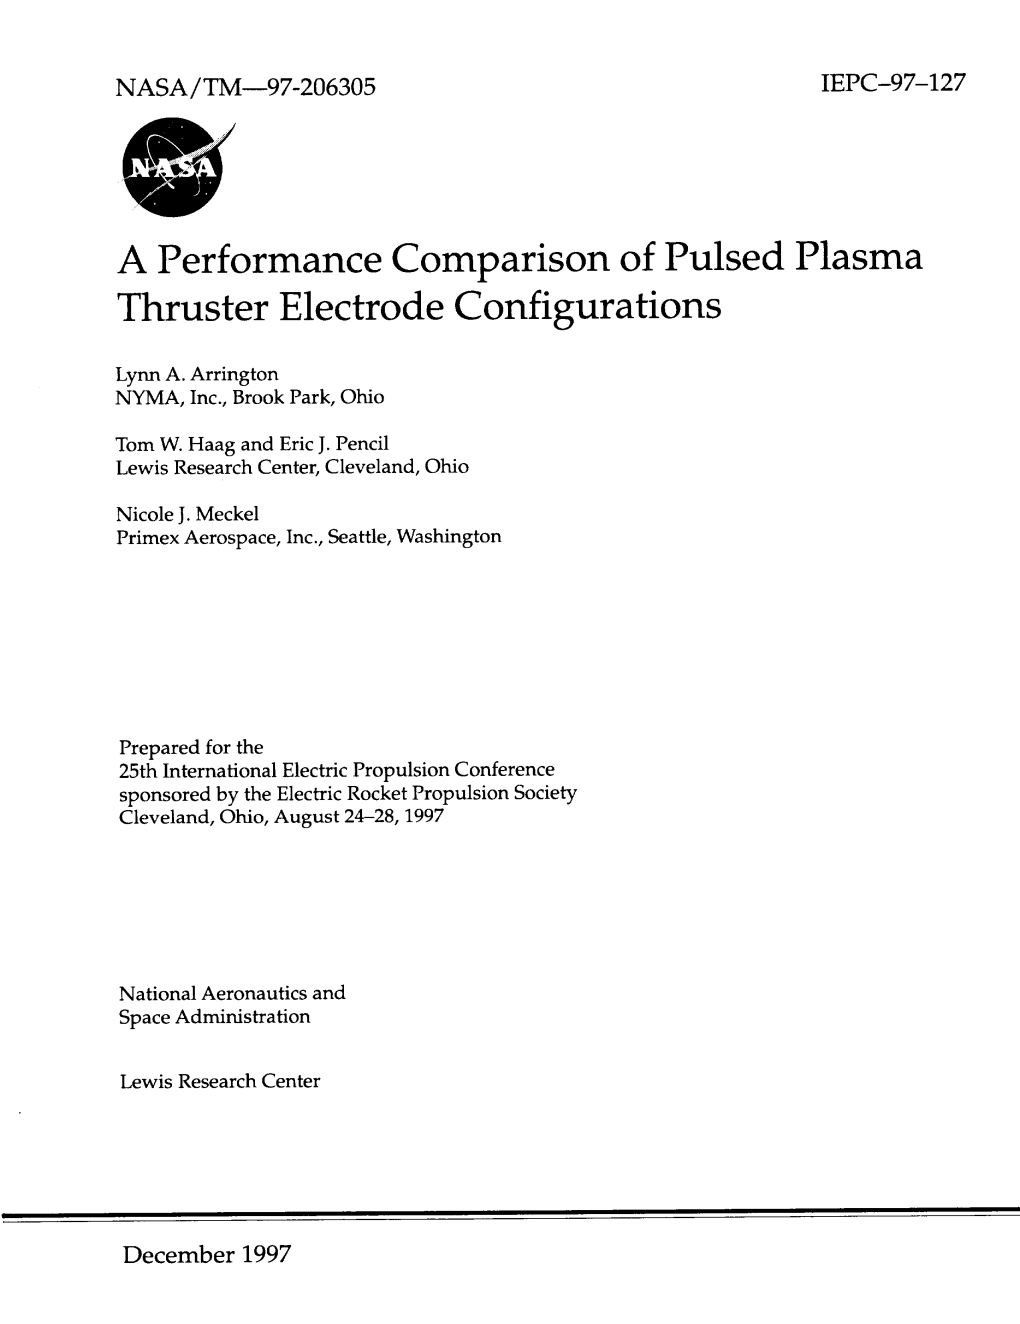 A Performance Comparison of Pulsed Plasma Thruster Electrode Configurations